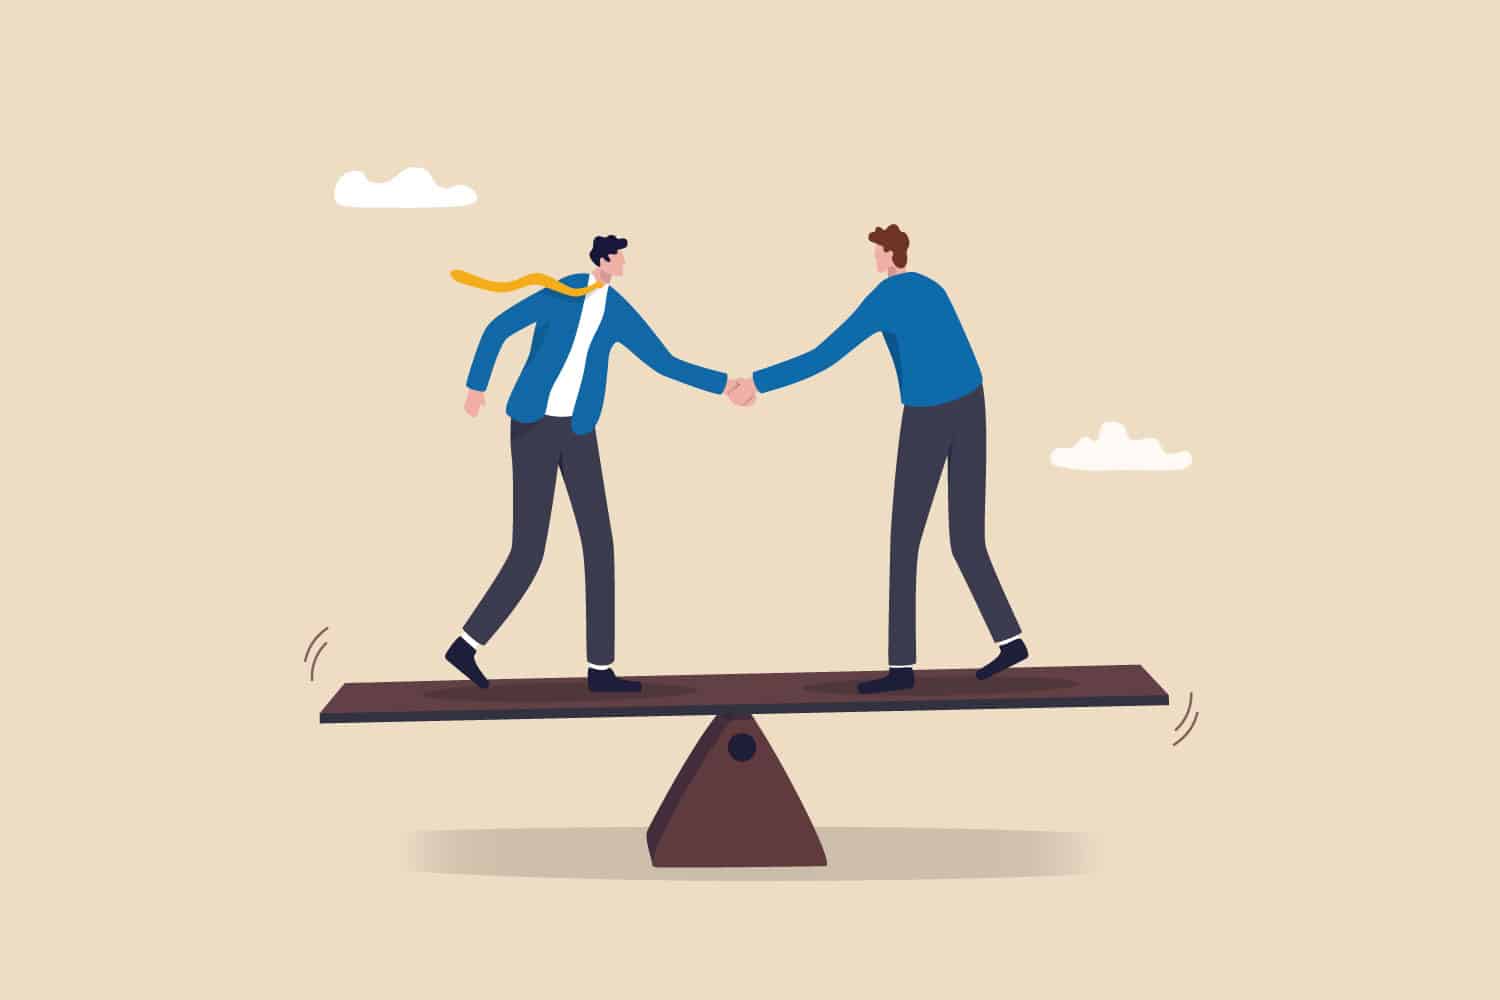 illustration of two people shaking hands on a see-saw representing partnership